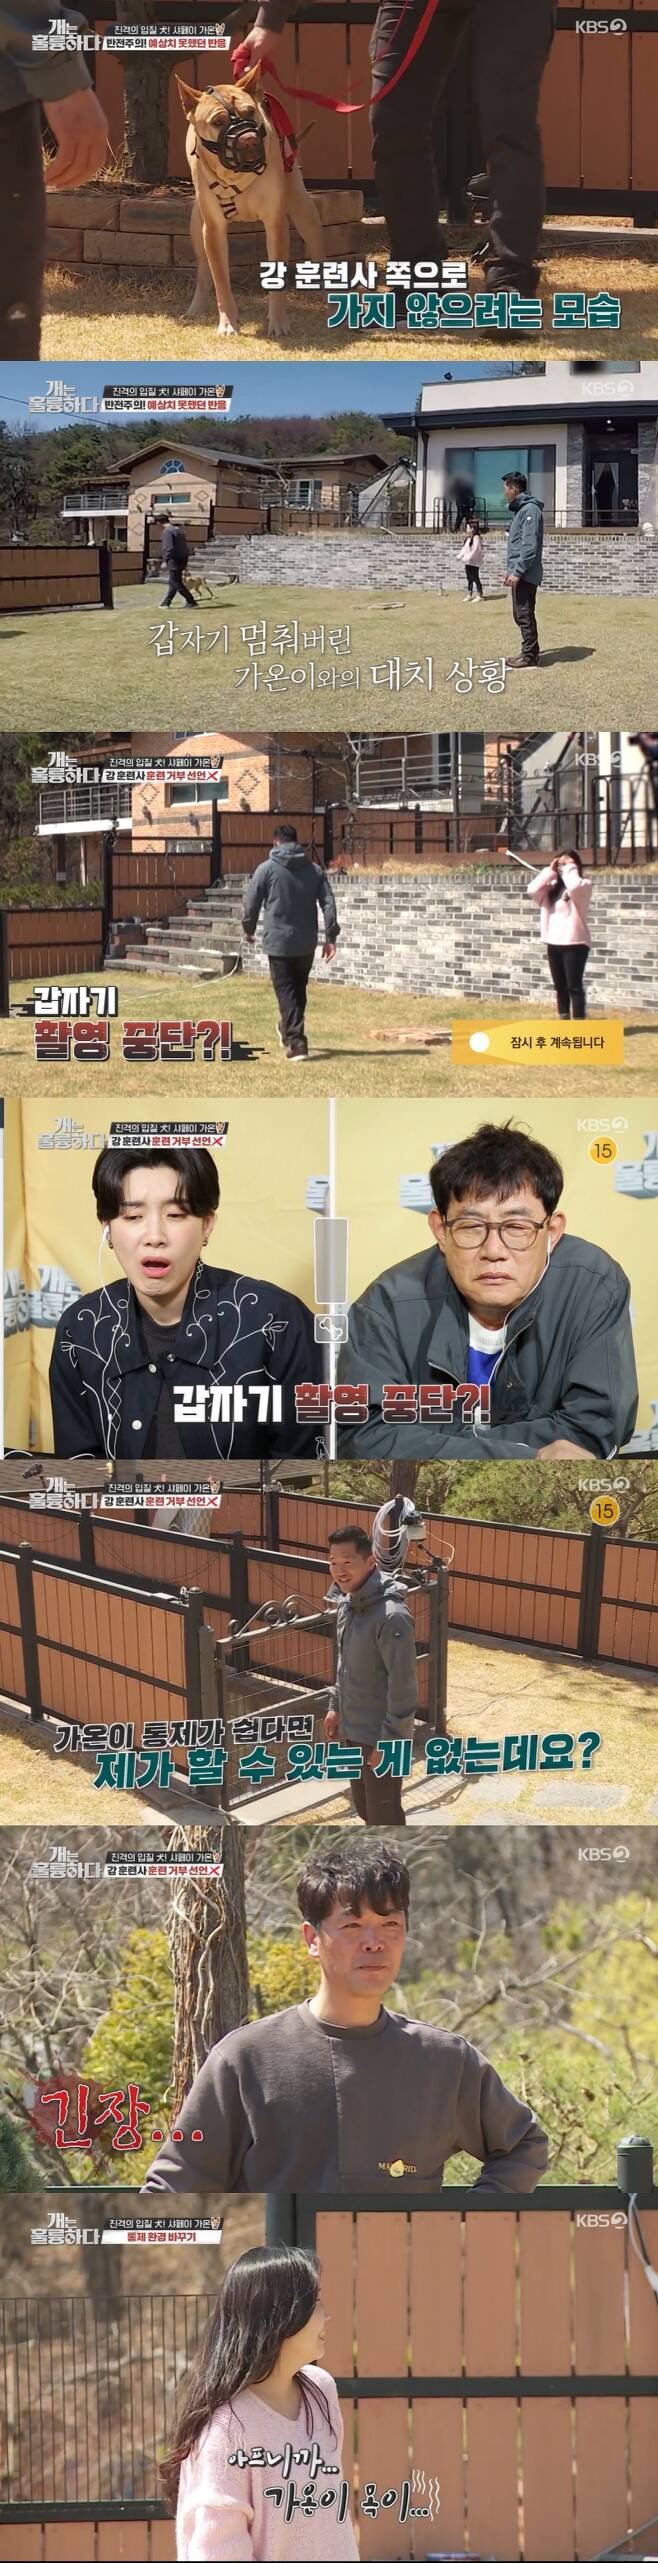 On KBS2s Dogs Are Incredible, which aired on the night of the 25th, the story of Shafei Supriya Pilgaonkar, an aggressive dog with strong barking and mouthing, was revealed.Kang Hyeong-wook explained, Shafei is more independent than other dogs, so there are many friends who act sensitively when Guardian tries to do what other dogs do not want.The Guardians said they lived in an apartment and moved to a power house for Supriya Pilgaonkar.Kang Hyeong-wook praised it as a really good job. Mom Guardian said, I quit the company.I wanted to take a walk because Supriya Pilgaonkar is at home alone every day, he said. I can do it for Supriya Pilgaonkar.Supriya Pilgaonkar seemed to have no big problem growing up with the great love of Guardians like this.However, as the neighbors and dogs passed through the wall, they could not stop the fierce barking with excitement.Supriya Pilgaonkar ran and barked until she was not seen in her own view, whether it was a person or a puppy.Neighbors said aggressive Supriya Pilgaonkar was nervous about the action and the neighborhood was loud.There was another problem for Supriya Pilgaonkar.Supriya Pilgaonkar showed extreme aggression to bite suddenly without stopping barking when the crew visited the filming car.My mother Guardian also said, My dad has seen it a few times, so I reached out and just asked, and then my father has been taking tranquilizers sometimes.The Guardians were sweating and sweating because they were running toward passersby even when Supriya Pilgaonkar took a walk.When I go out for a walk, I only go on a path without people, said my mother Guardian.Ive also sent a few training camps, but I asked another dog, and since then I dont let another dog meet at all, her husband Guardian said.The Guardians said, Let them all go. Why do you raise such a dog? Euthanasia. I do not think I should raise it.I heard a few times that I should deal with it before I get rid of others. His wife, Guardian, said, After being bitten at the end, I told my husband that I could not do it anymore. But after a day, I seemed crazy.I still have more to do, so I applied here. Sometimes Im afraid that I can not touch my hands, but I still want to live with you.Lee Kyong-kyu and Jang Doyeon visited the Supriya Pilgaonkars house and barked strongly as soon as they rang the doorbell.Wife Guardian warned the pair: Be careful with your hands and never touch them, the pair approached slowly, covering their hands as much as possible.I jump and I climb people and bite them, Ive been bitten by my arm, her husband Guardian said.Supriya Pilgaonkar briefly rushed to Lee Kyung-kyu while the Guardian loosely held the line to tie it.Lee Kyoung-kyu and Jang Doyeon avoided back in surpriseKang Hyeong-wook saw Supriya Pilgaonkar, who kept barking away from the Guardian, and decided, He does not want to protect the Guardian or bark with the courage of the Guardian.Supriya Pilgaonkar kept barking at the two even after the Guardian was gone, barking even worse without eating the snacks Lee Kyong-kyu had thrown at.It was similar to the Doberman Bianca (appearing 85 times), which I had previously met, Lee Kyung-kyu said.There is no downfall without a master, I am excited without notice, I never look at it and look at it all the way.Kang Hyeong-wook pointed out, It is also a problem that those Guardians do not know how to control dogs.Kang Hyeong-wook pointed out why he uses a chest line instead of a neckline, saying, The chest line is easy for dogs and it will not be easy to control.The Guardians said, Nowadays, it is okay with the breastline. Then Kang Hyung-wook said, Well, thank you, I am so much.Kang Hyeong-wook said, If control is easy, there is nothing I can do. Kang was angry at the Guardians who knew there was a problem but only excused them.You met Supriya Pilgaonkar because it was hard to raise. You considered euthanasia. Then it is an individual who can not control himself.You dont know when youre going to turn around. Youre already bitten a lot.It is safe to use a neckline or a tool to make sure that you have more control in situations where you have to be careful, he said.He said he needed to advise replacing control tools and improve the Guardians attitudes, as his wife, Guardian, who brought him a leash, said: To fill the semi-choke chain?I laughed as if it were ridiculous.The river trainer said, I did not want to fill (the anti-choke chain) with Wenman.How sick were the physical people, Supriya Pilgaonkar pointed out to the Guardian, because my neck hurts.I did not do much I do not want to do, so I do not have sociality. In order to raise sociality, I have to control my tears firmly in my heart, he said.Kang Hyeong-wook advised, If you want to be pretty, you have to control it. If you can not control it, you can not be pretty.Subsequently, training for taking the initiative with Supriya Pilgaonkar was started.The river trainer said, Now he seems to be everyday to listen to the Guardian instructions, and the Guardian admitted, It was like listening once in 10.The river trainer said that if he wanted to take the lead in the walk, he had to bring it by force when he did not listen, and his mother Guardian grabbed his heart and dragged Supriya Pilgaonkar.I did not bring the Guardian to go here, but I will feel guilty. The guilt must be overcome by the Guardian.I cant help you, he said.Supriya Pilgaonkar kept trying to go in a direction other than the direction the owner was going.However, after several repeated training sessions, Supriya Pilgaonkar succeeded in taking a walk under the leadership of the Guardian.The instructor advised me to praise him with words instead of praise for his skinship.Second, we started aggressive control training.Lee Kyoung-kyu and Jang Doyeon appeared as outsiders, and Supriya Pilgaonkar showed aggression immediately after encountering the two.But after the control training, he succeeded in walking safely with Supriya Pilgaonkar in front of the outsider.Next, with Helperdog, aggressive control training was followed.Supriya Pilgaonkar struggled with a distressing screech as she went out on the road, and the Guardians were sorry.The river trainer said: Supriya Pilgaonkar will be Choices, pain when strangled, and a desire to run into that dog. Of two, Choices.If you can not breathe and you want to hurt, you will not stop, and if you want to breathe, you will not run. Superiya Pilgaonkar was strongly repulsed by the river trainer, and the river trainer was tense, pulling the strings strongly.Eventually, Supriya Pilgaonkar followed the control of the river trainer.Kang Hyeong-wook took Supriya Pilgaonkar and passed the helper dog, and Supriya Pilgaonkar passed slowly through Helperdog.Superiya Pilgaonkar praised Choices for being controlled over bites; Kang Hyeong-wook praised that Choices are right; they did well.However, Supriya Pilgaonkar has been repulsing in training with Helperdog, and Kang Hyeong-wook controls Supriya Pilgaonkar and says, It is simple.If you jump, you have a price. If you want to bite him, you can bite him. Understand. If you dont understand, every day will be the same day. Kang Hyeong-wook told the Guardian, Looks at Supriya Pilgaonkar is a real strong dog, and when you run, you bite your chest, not your feet.The frightened children bite under; Superiya Pilgaonkar is never a weak dog, so Guardian should be more strong, he advised.Kang Hyeong-wook saw the possibility of Supriya Pilgaonkar after repeated training and praised both Supriya Pilgaonkar and Guardian, saying, It seems to be.Even in the video of the Guardians, Superiya Pilgaonkar was seen walking steadily without barking under Guardian control.